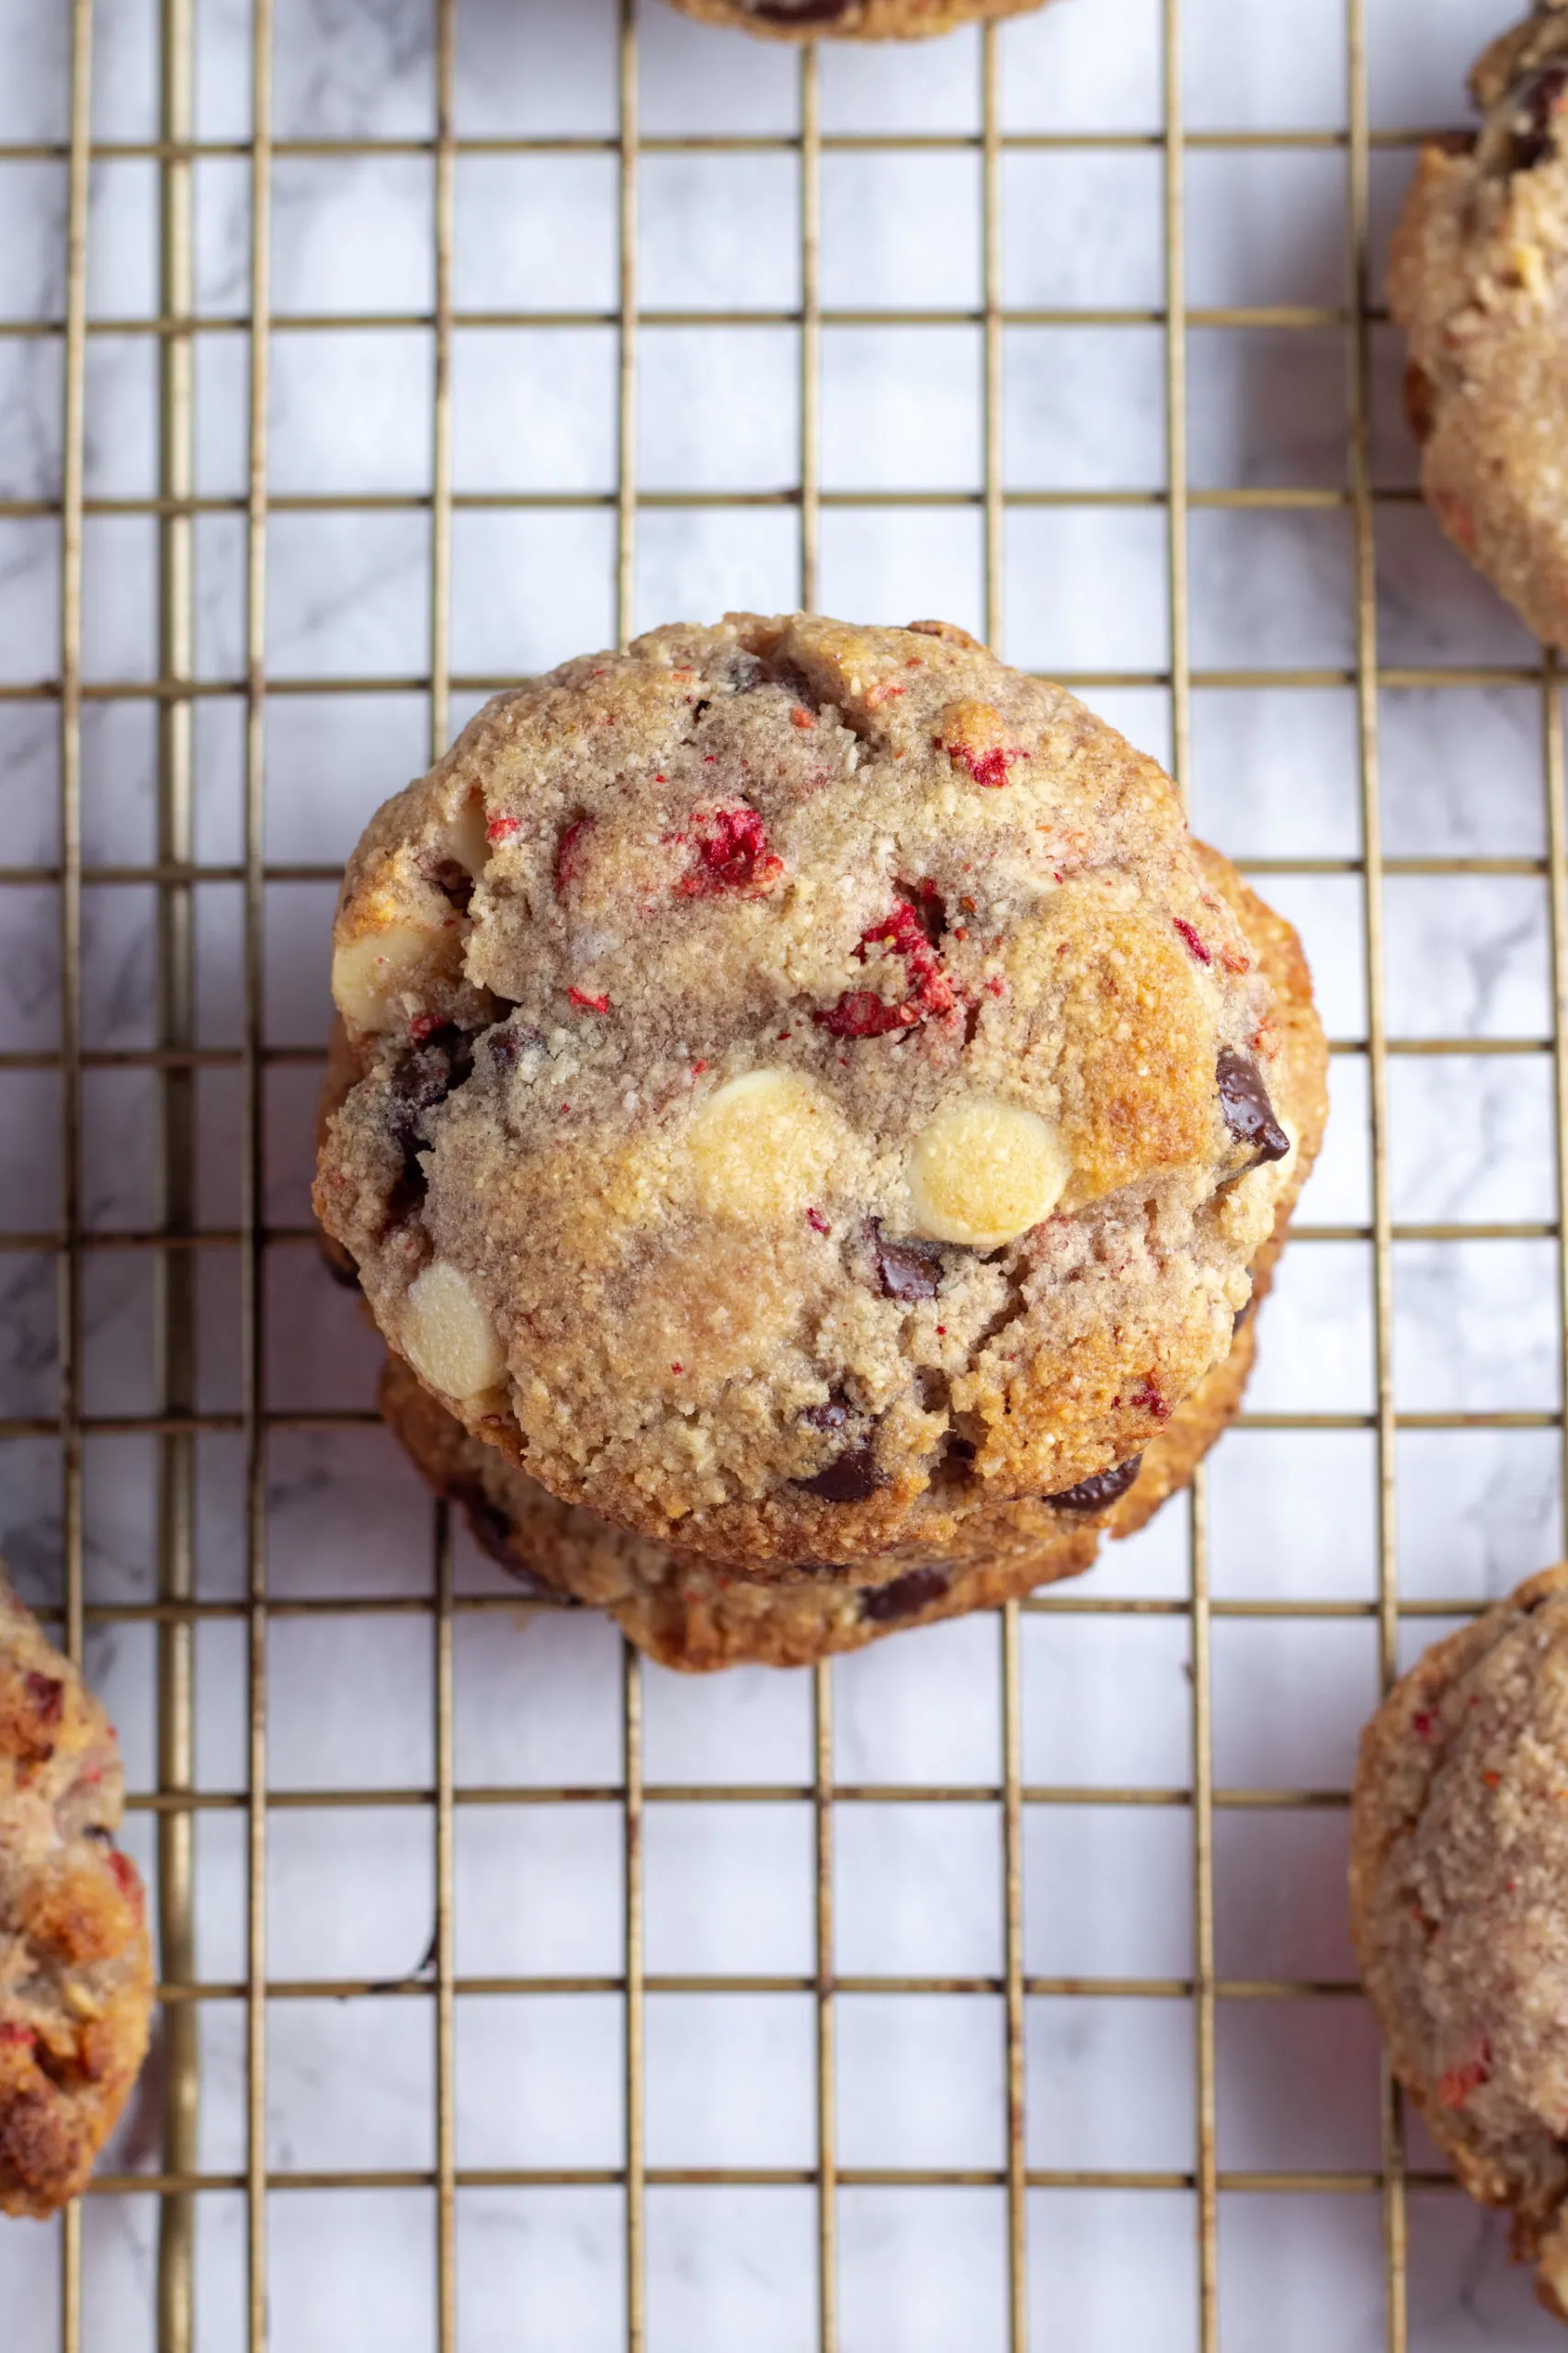 Low carb chocolate chip cookies with strawberry and white chocolate.